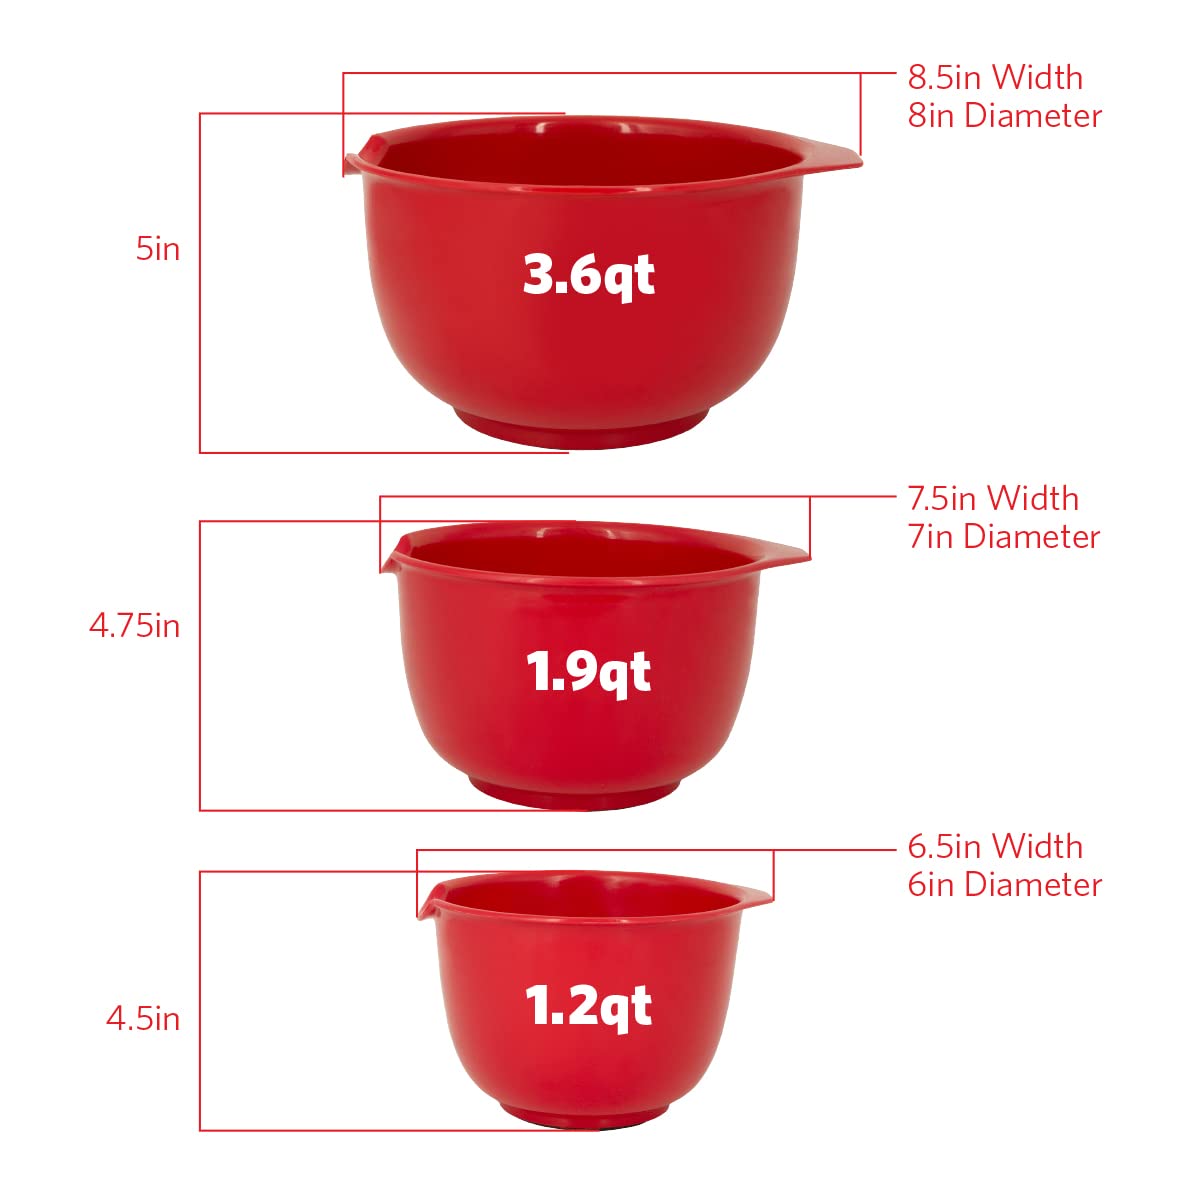 Glad Mixing Bowls with Pour Spout, Set of 3 | Nesting Design Saves Space | Non-Slip, BPA Free, Dishwasher Safe Plastic | Kitchen Cooking and Baking Supplies, Red